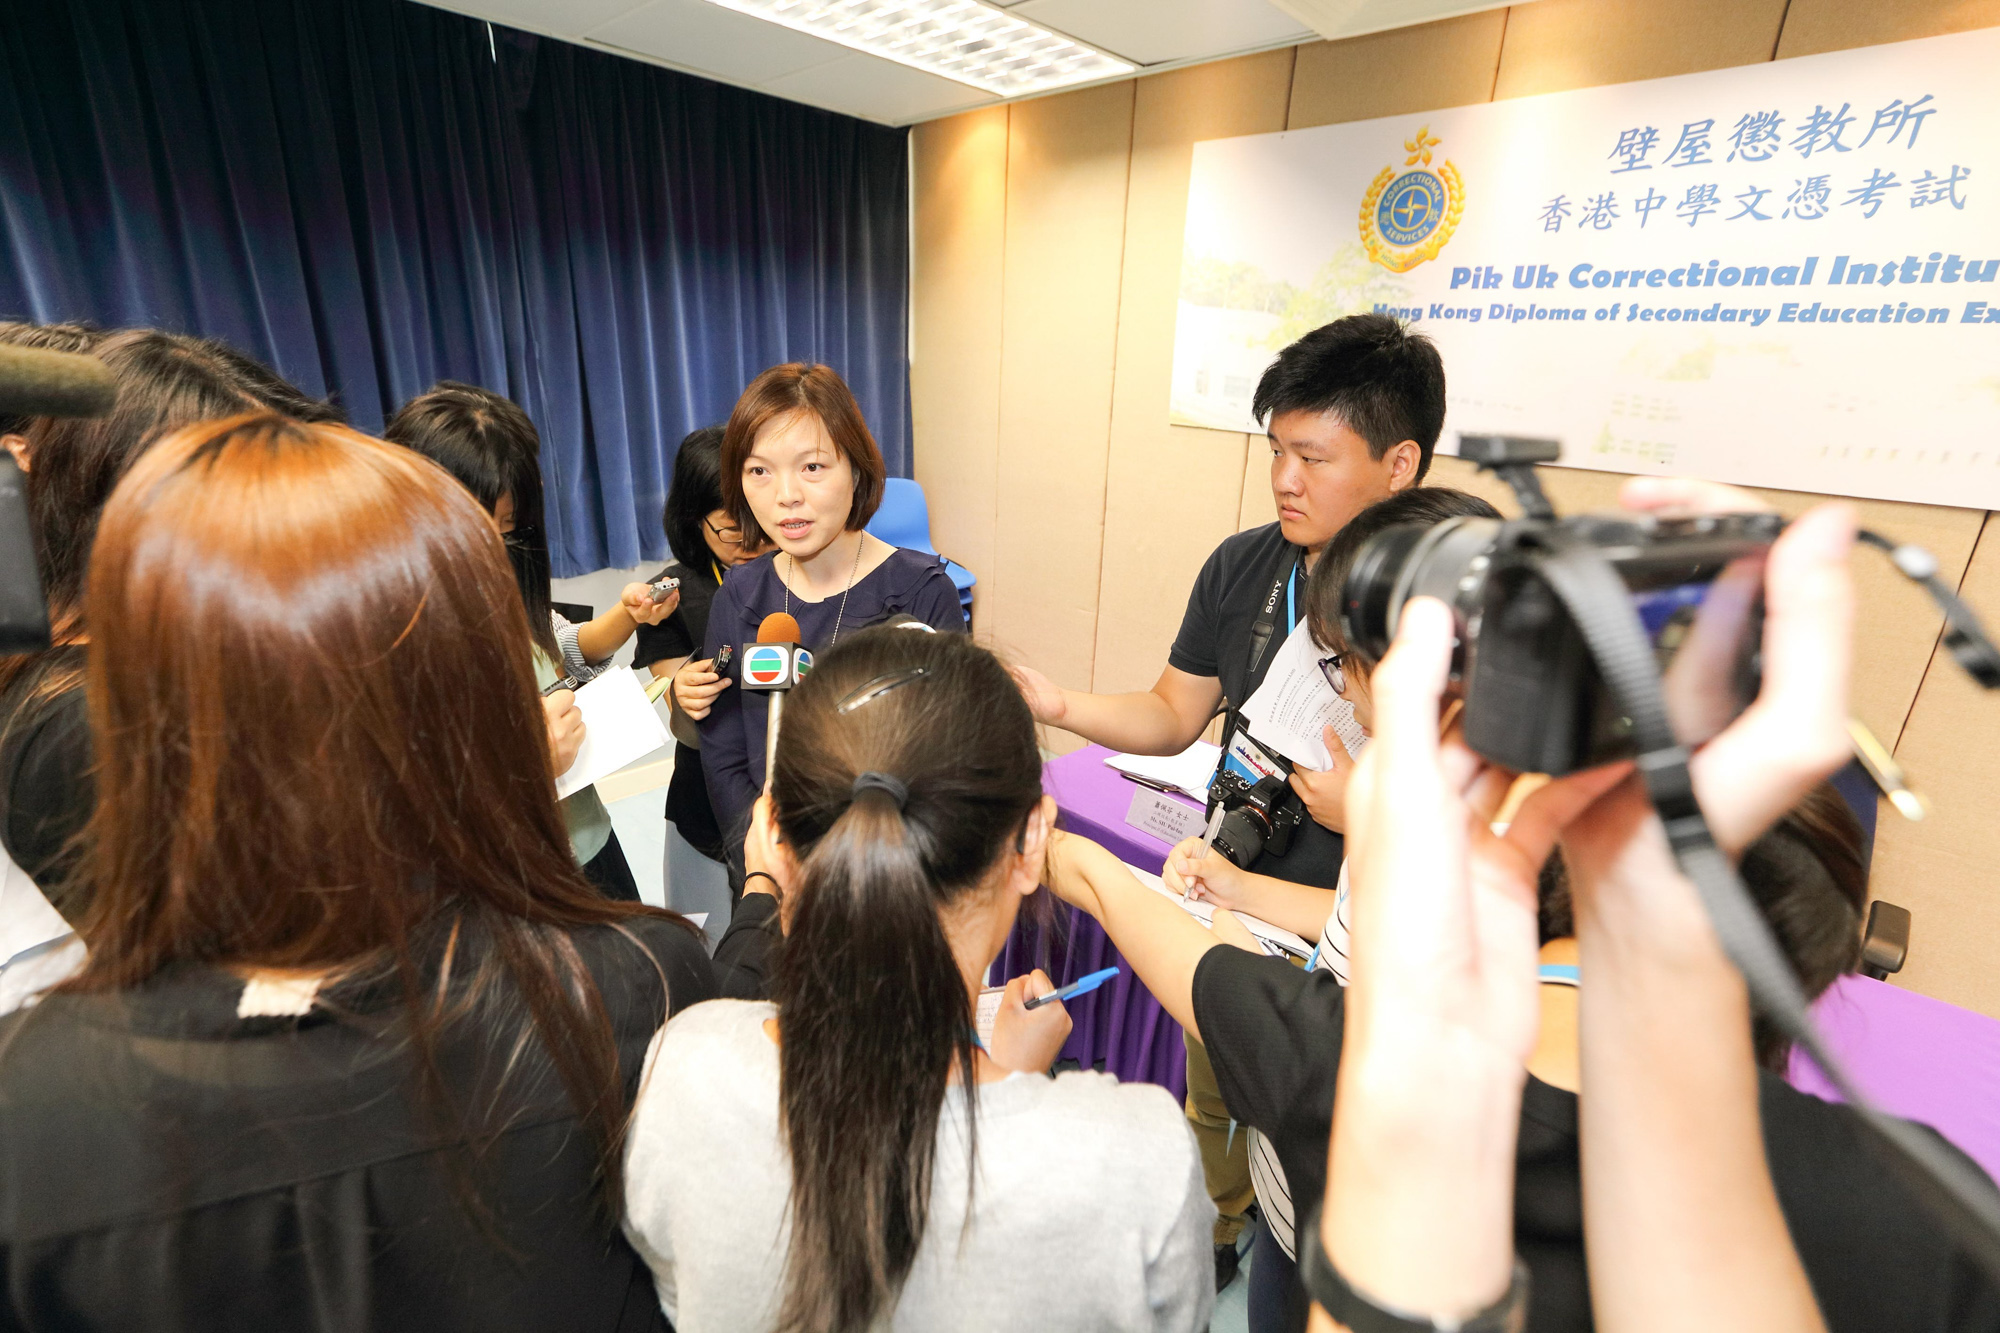 Media representatives covered the young persons in custody receiving the results of the Hong Kong Diploma of Secondary Education Examination at Pik Uk Correctional Institution on July 12, 2017.